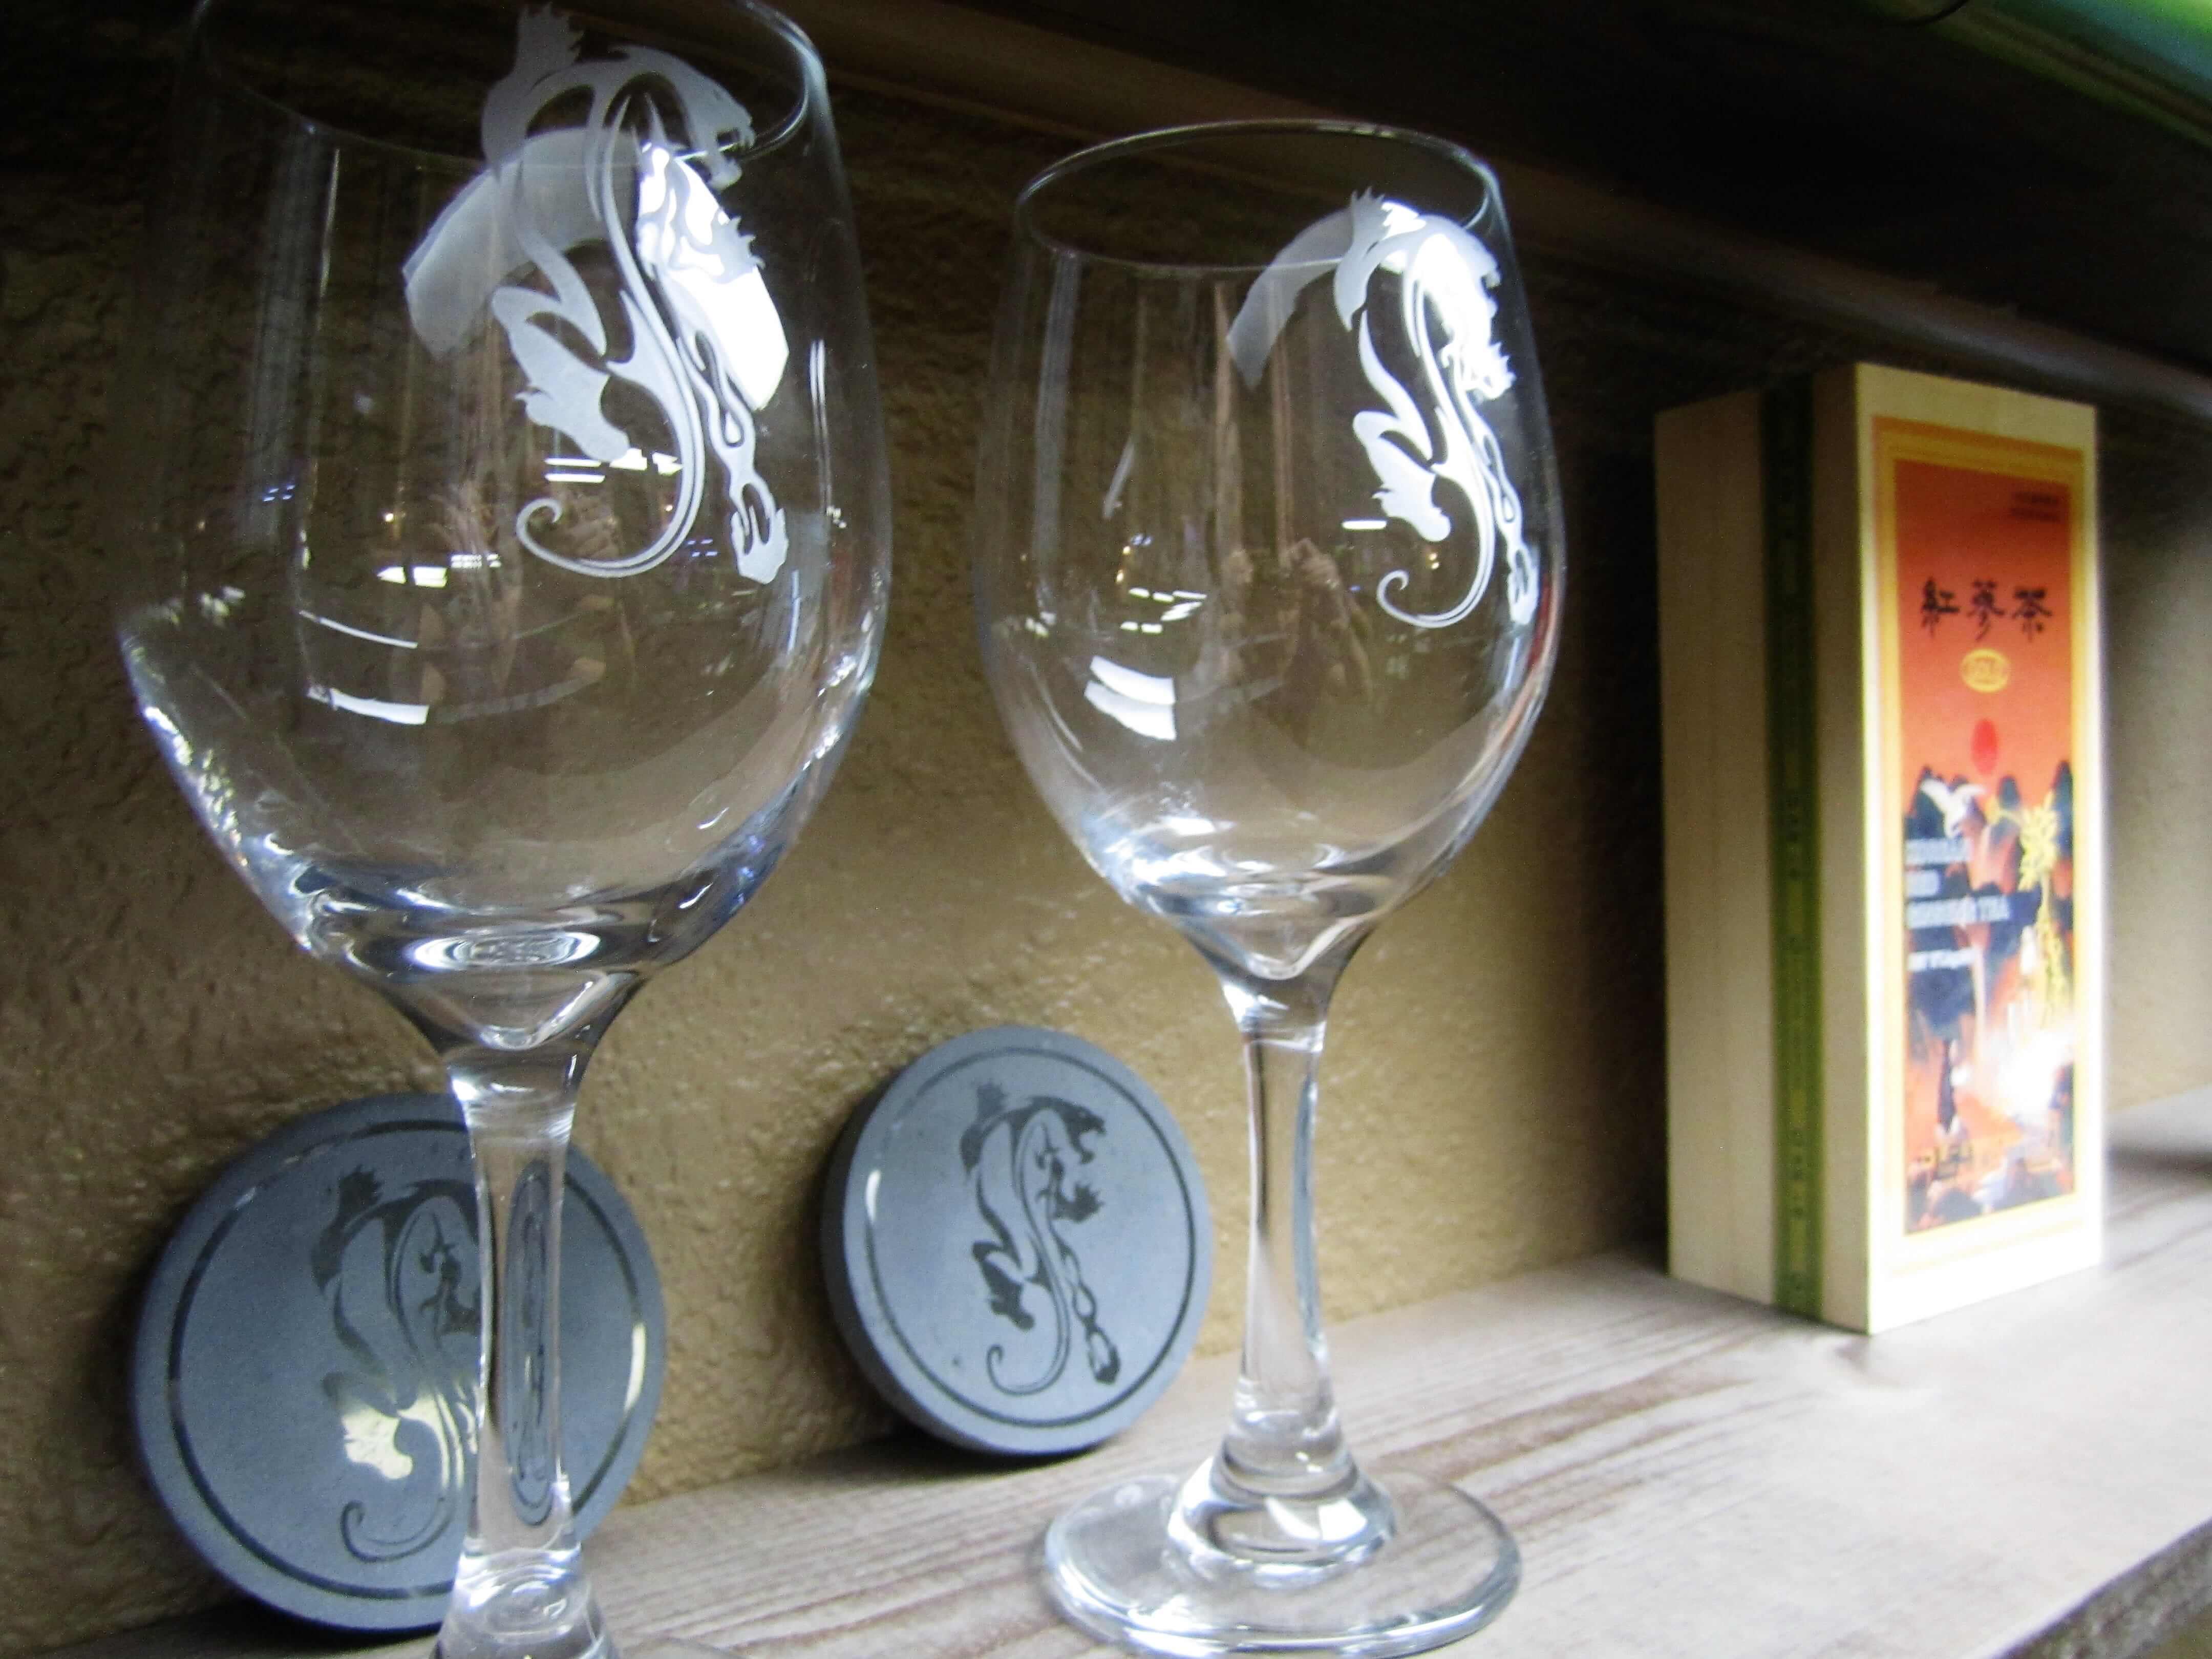 Panther Bash wine glasses